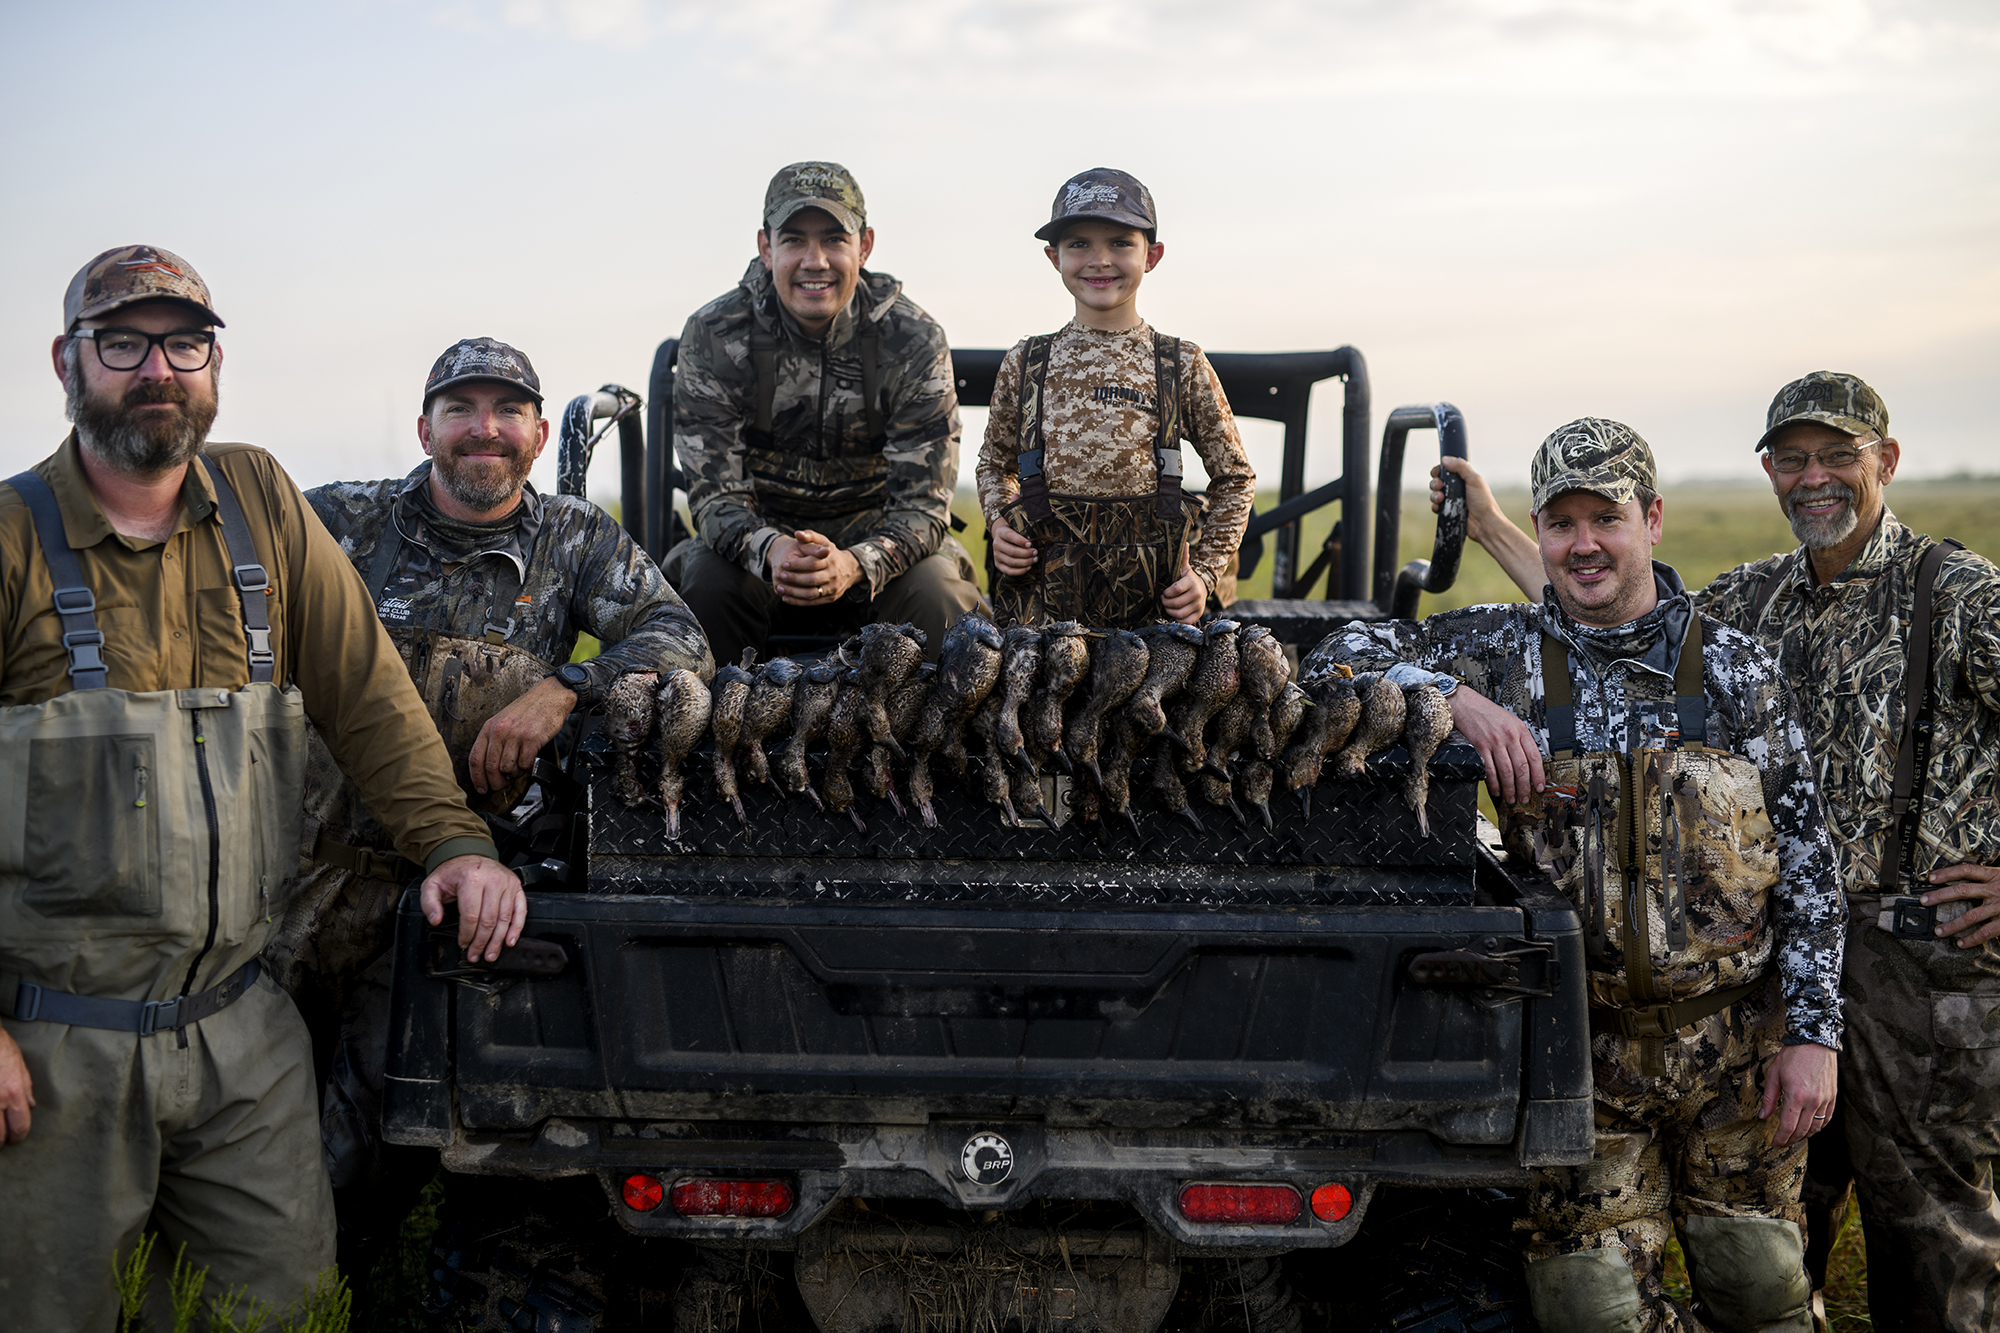 A successful morning of teal hunting.